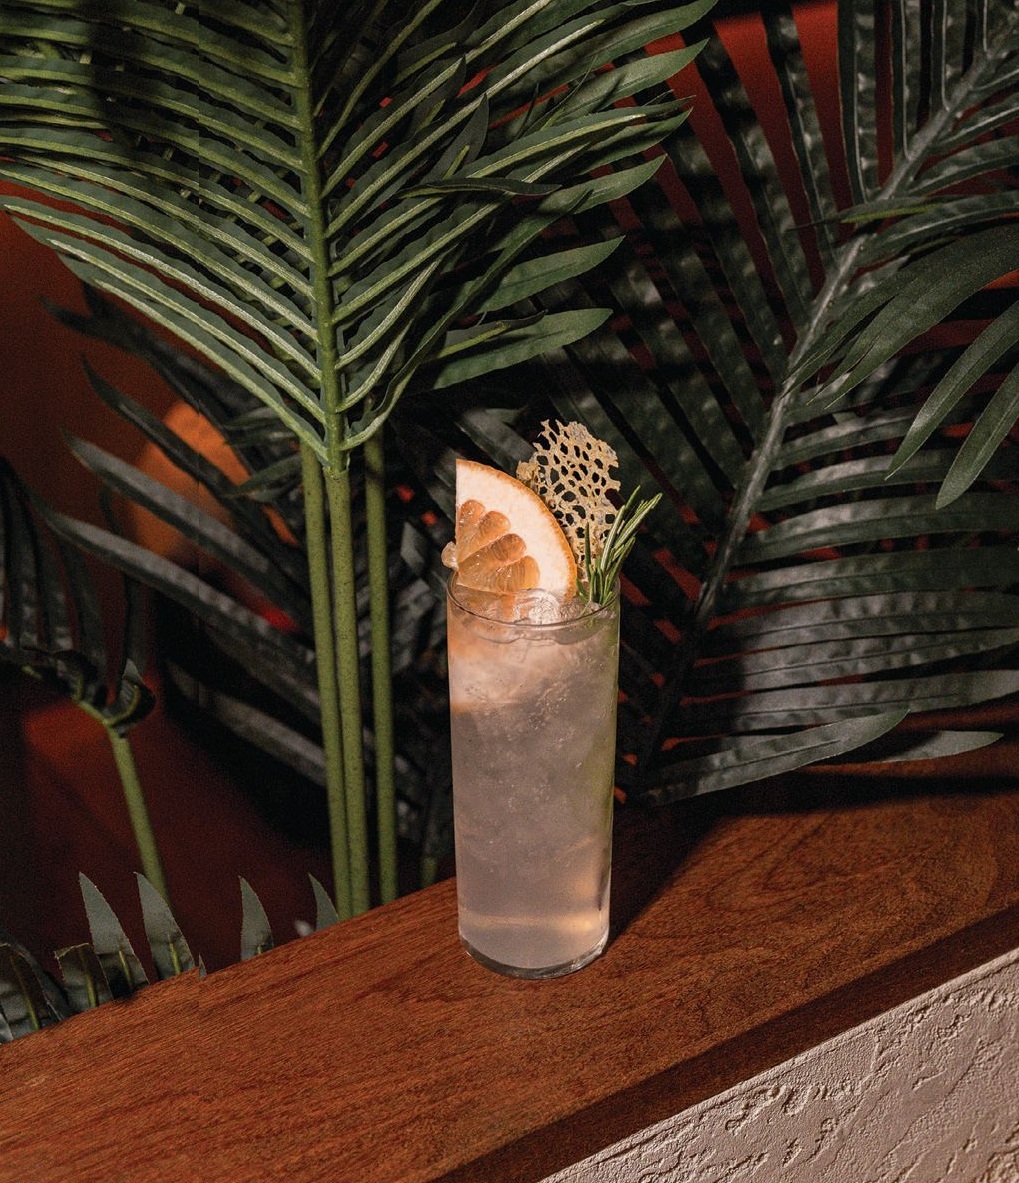 Costera’s take on a paloma is crafted with rosemary-infused Montelobos mezcal PHOTO BY WADE HALL